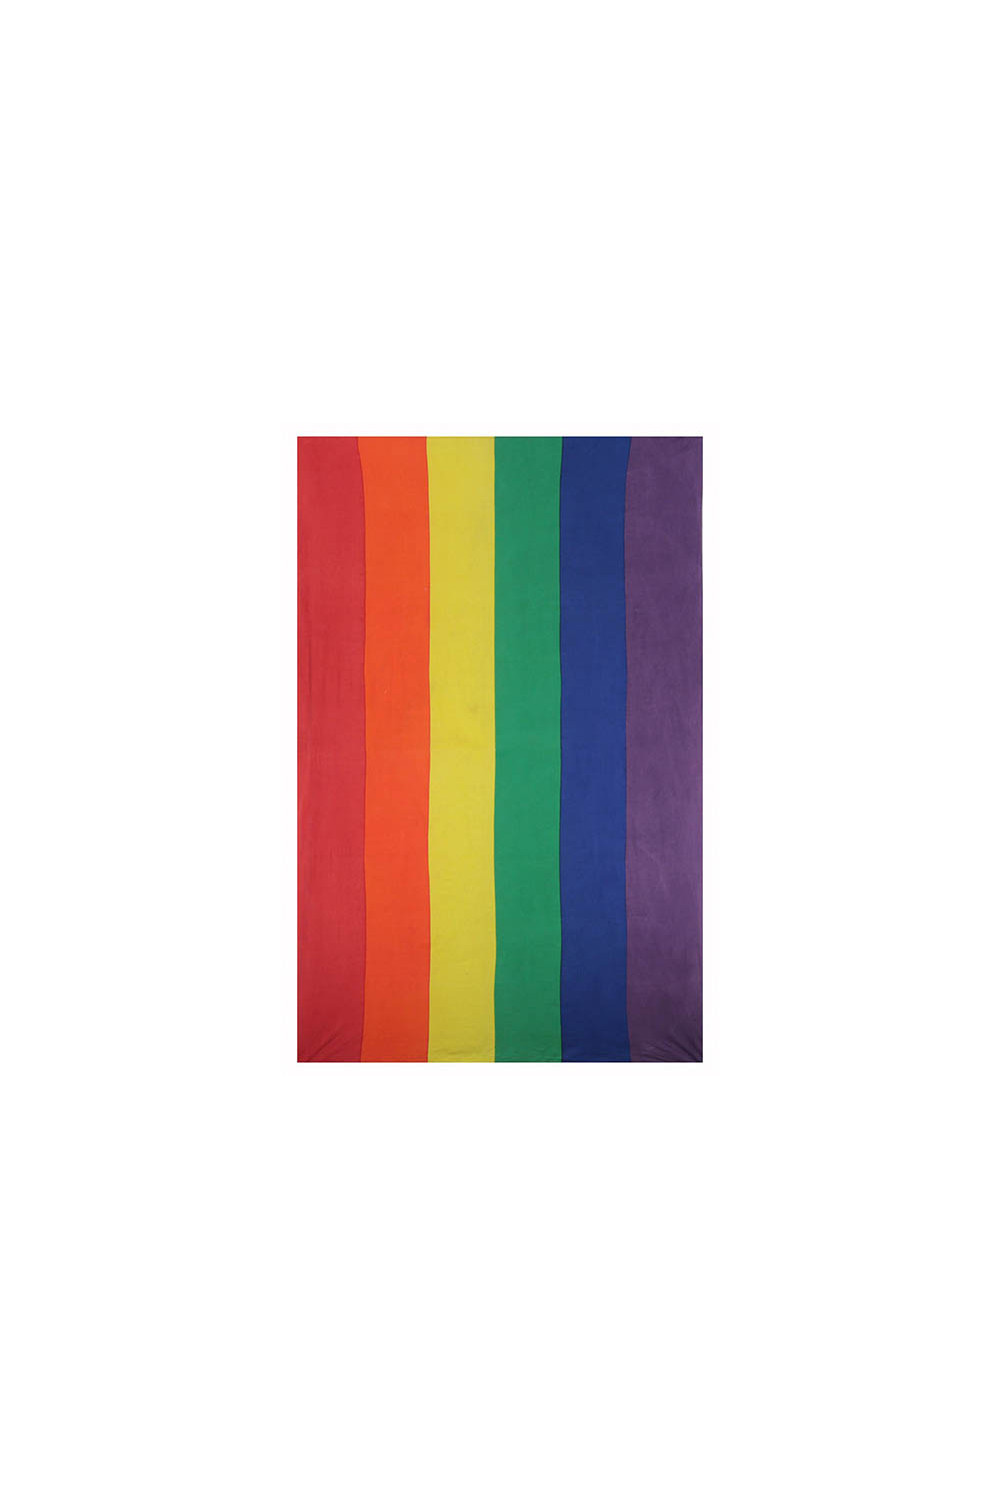 Rainbow Gay Pride Flag Mini Tapestry 30x45 **RESERVE NOW FOR EARLY NOVEMBER DELIVERY**